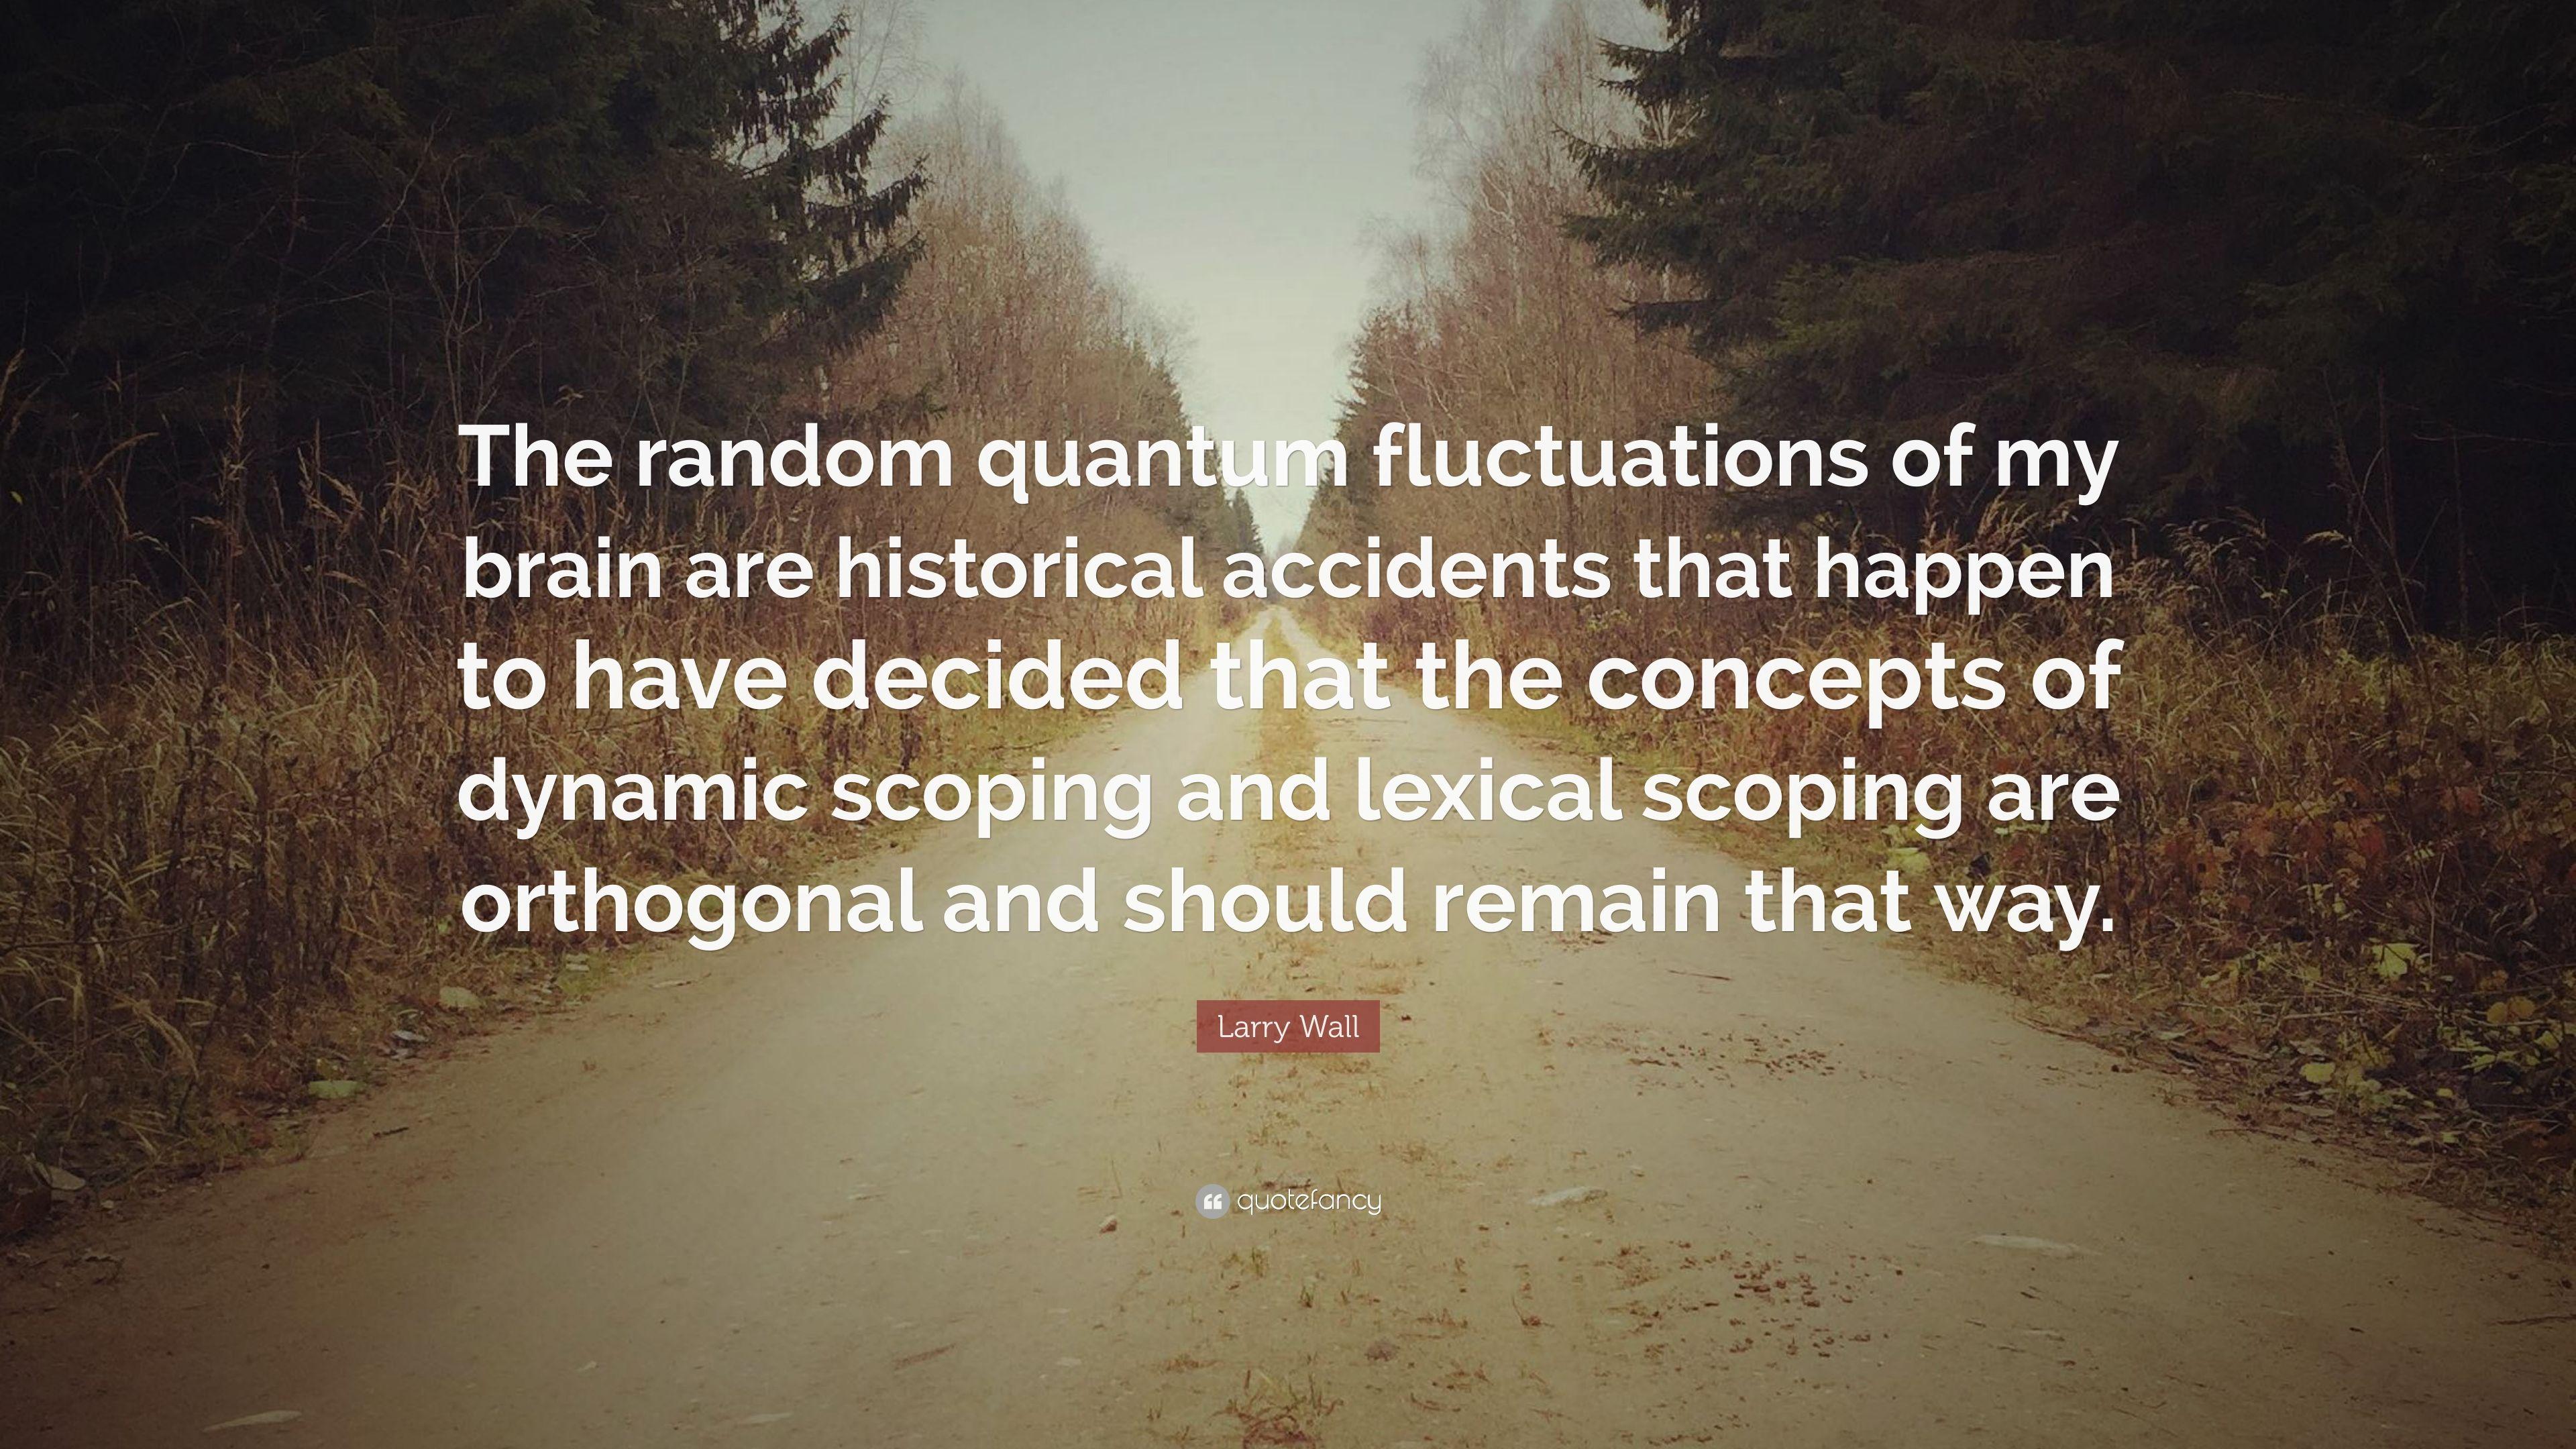 Larry Wall Quote: “The random quantum fluctuations of my brain are